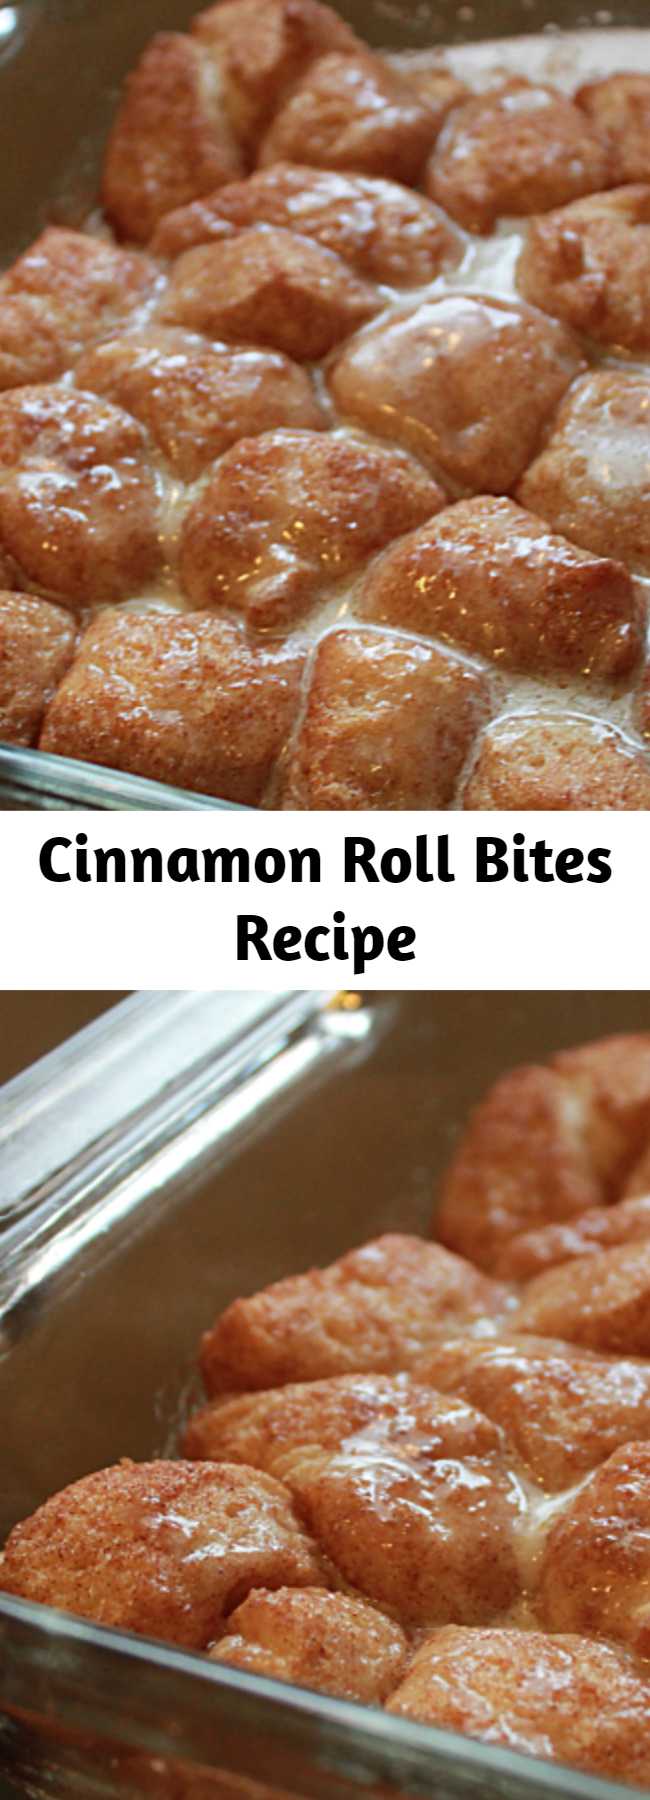 Cinnamon Roll Bites Recipe - Ooey, gooey Cinnamon Roll Bites give you all the great taste of a cinnamon roll without all the work! They take no time at all to make and will vanish quicker than a blink of an eye.